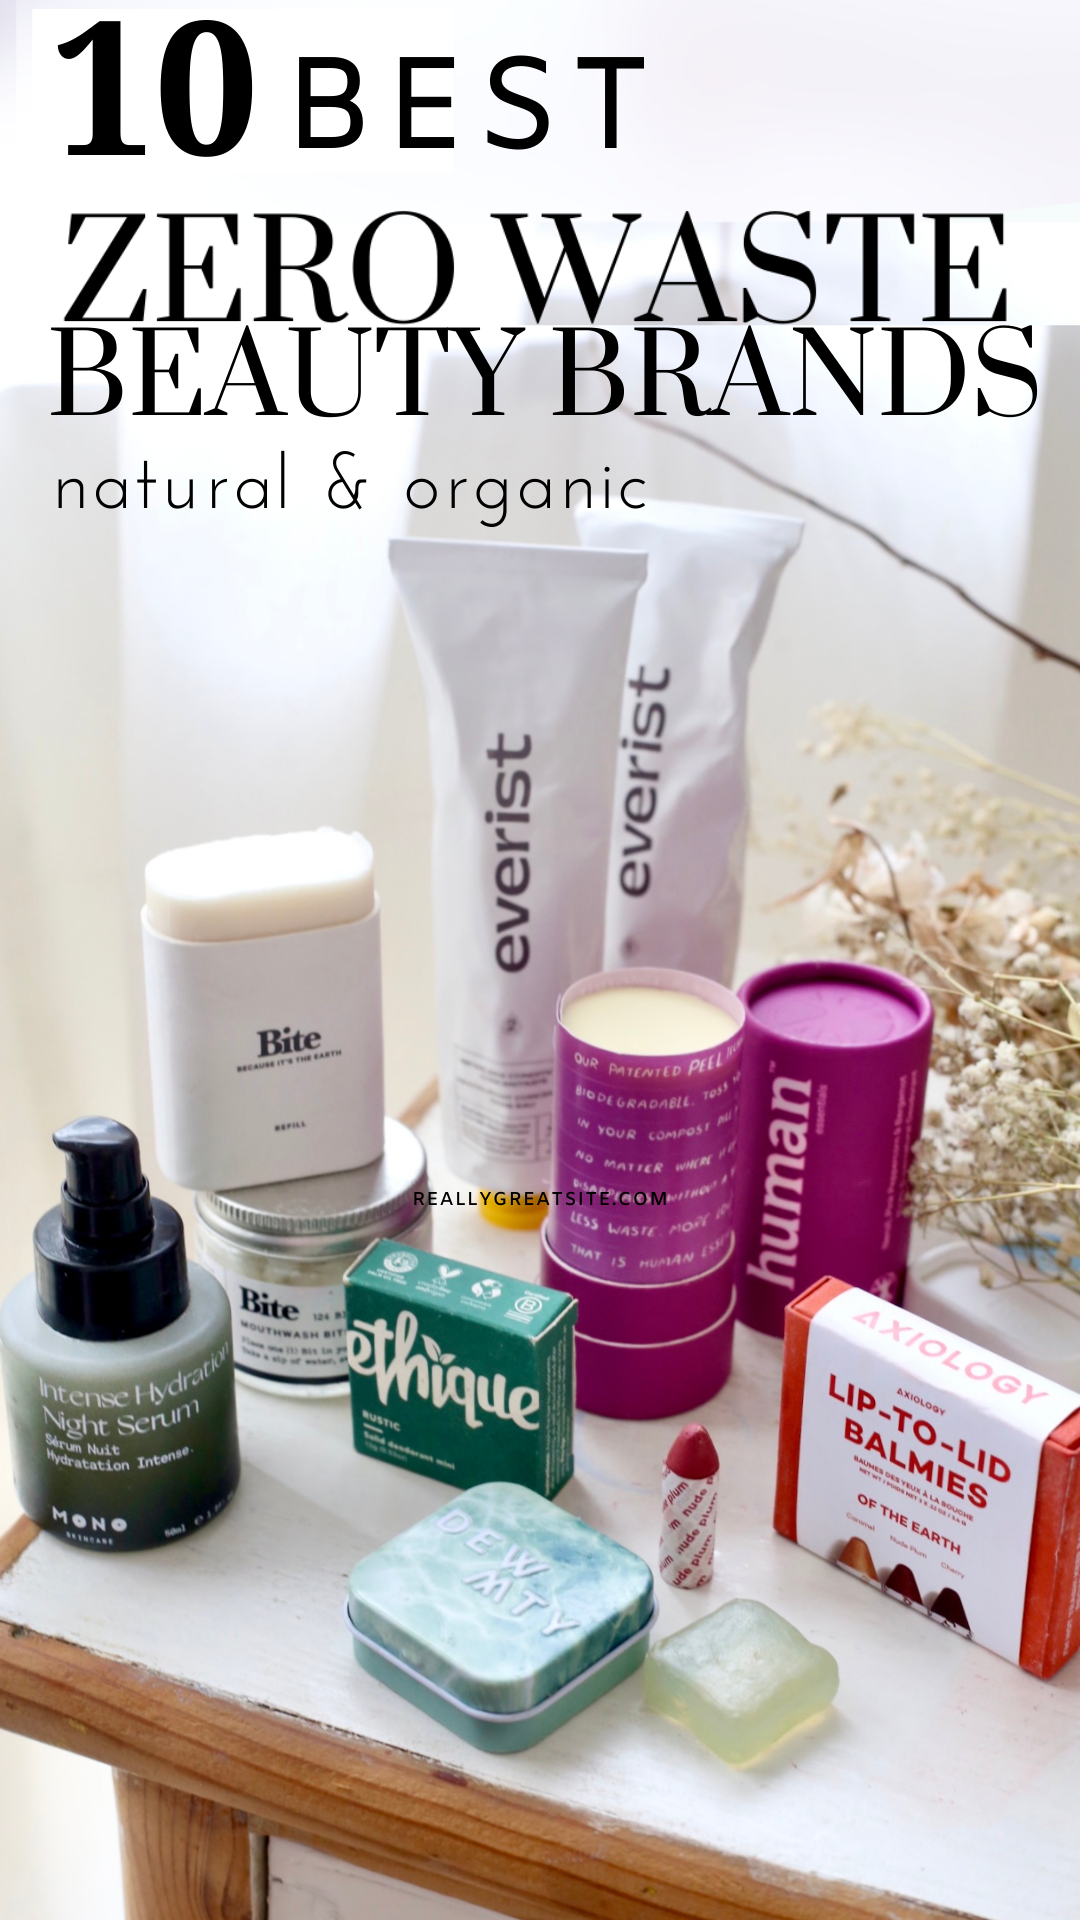 Best Clean Beauty Brands at Target: 50 Natural Brands - Organic